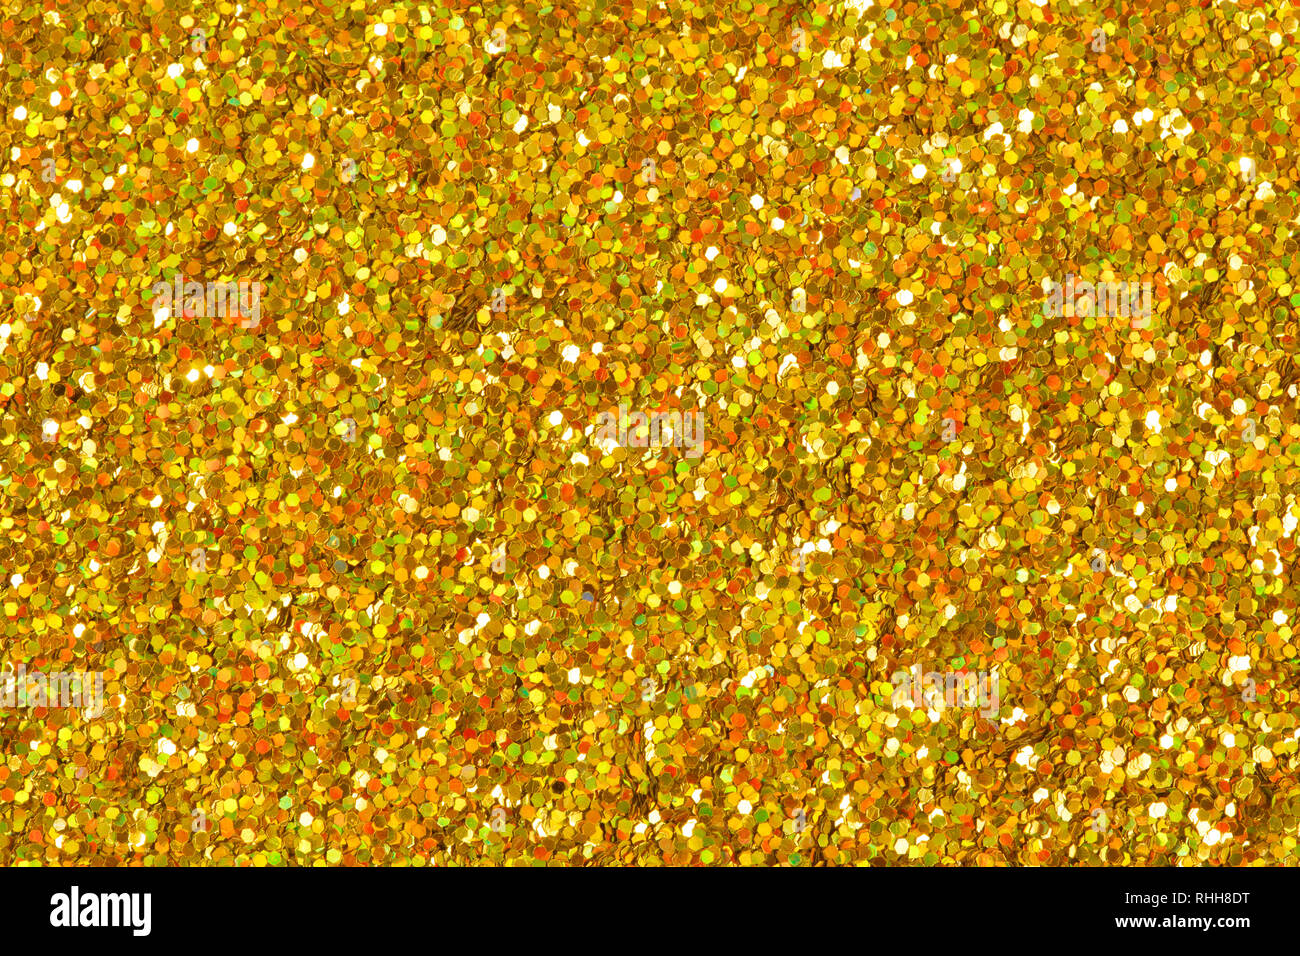 Glitter makeup powder texture for your unique project. Stock Photo